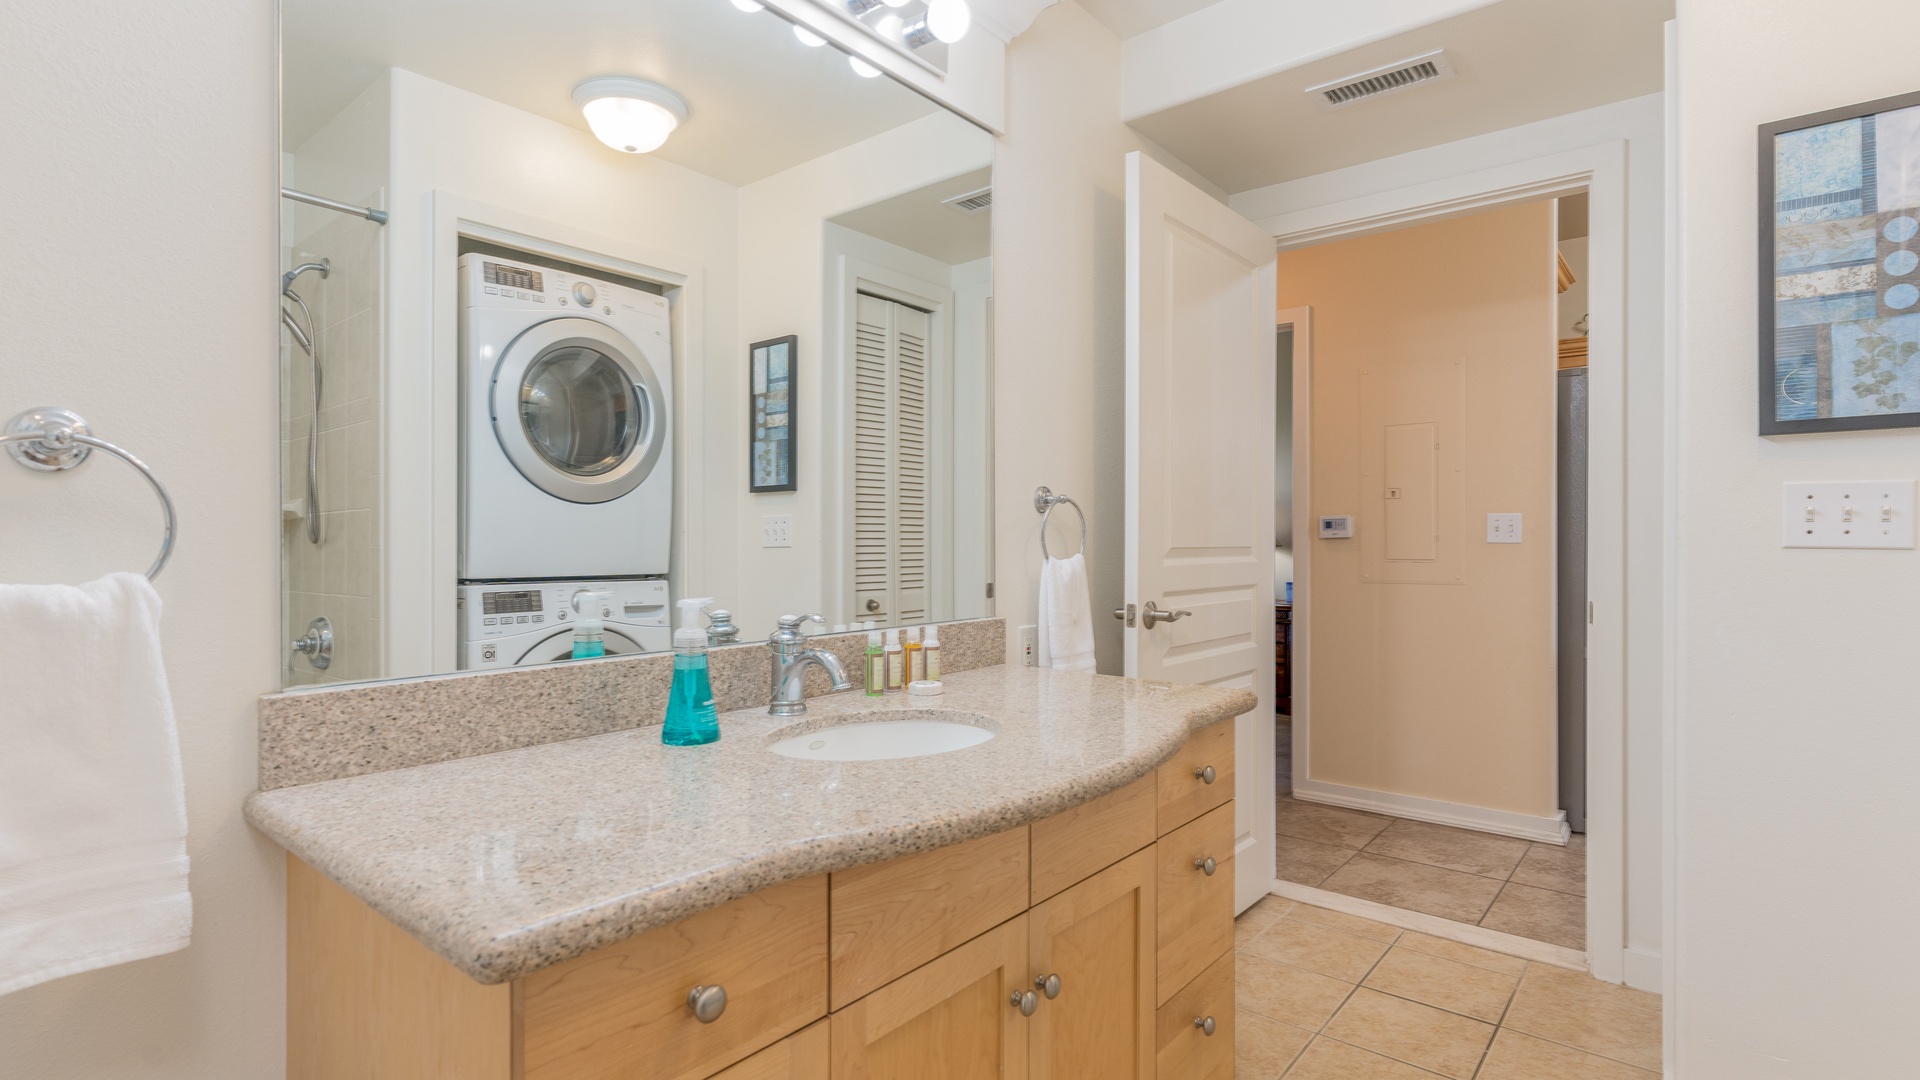 Kapolei Vacation Rentals, Kai Lani 8B - The second guest bathroom with ample lighting and beautiful vanity.